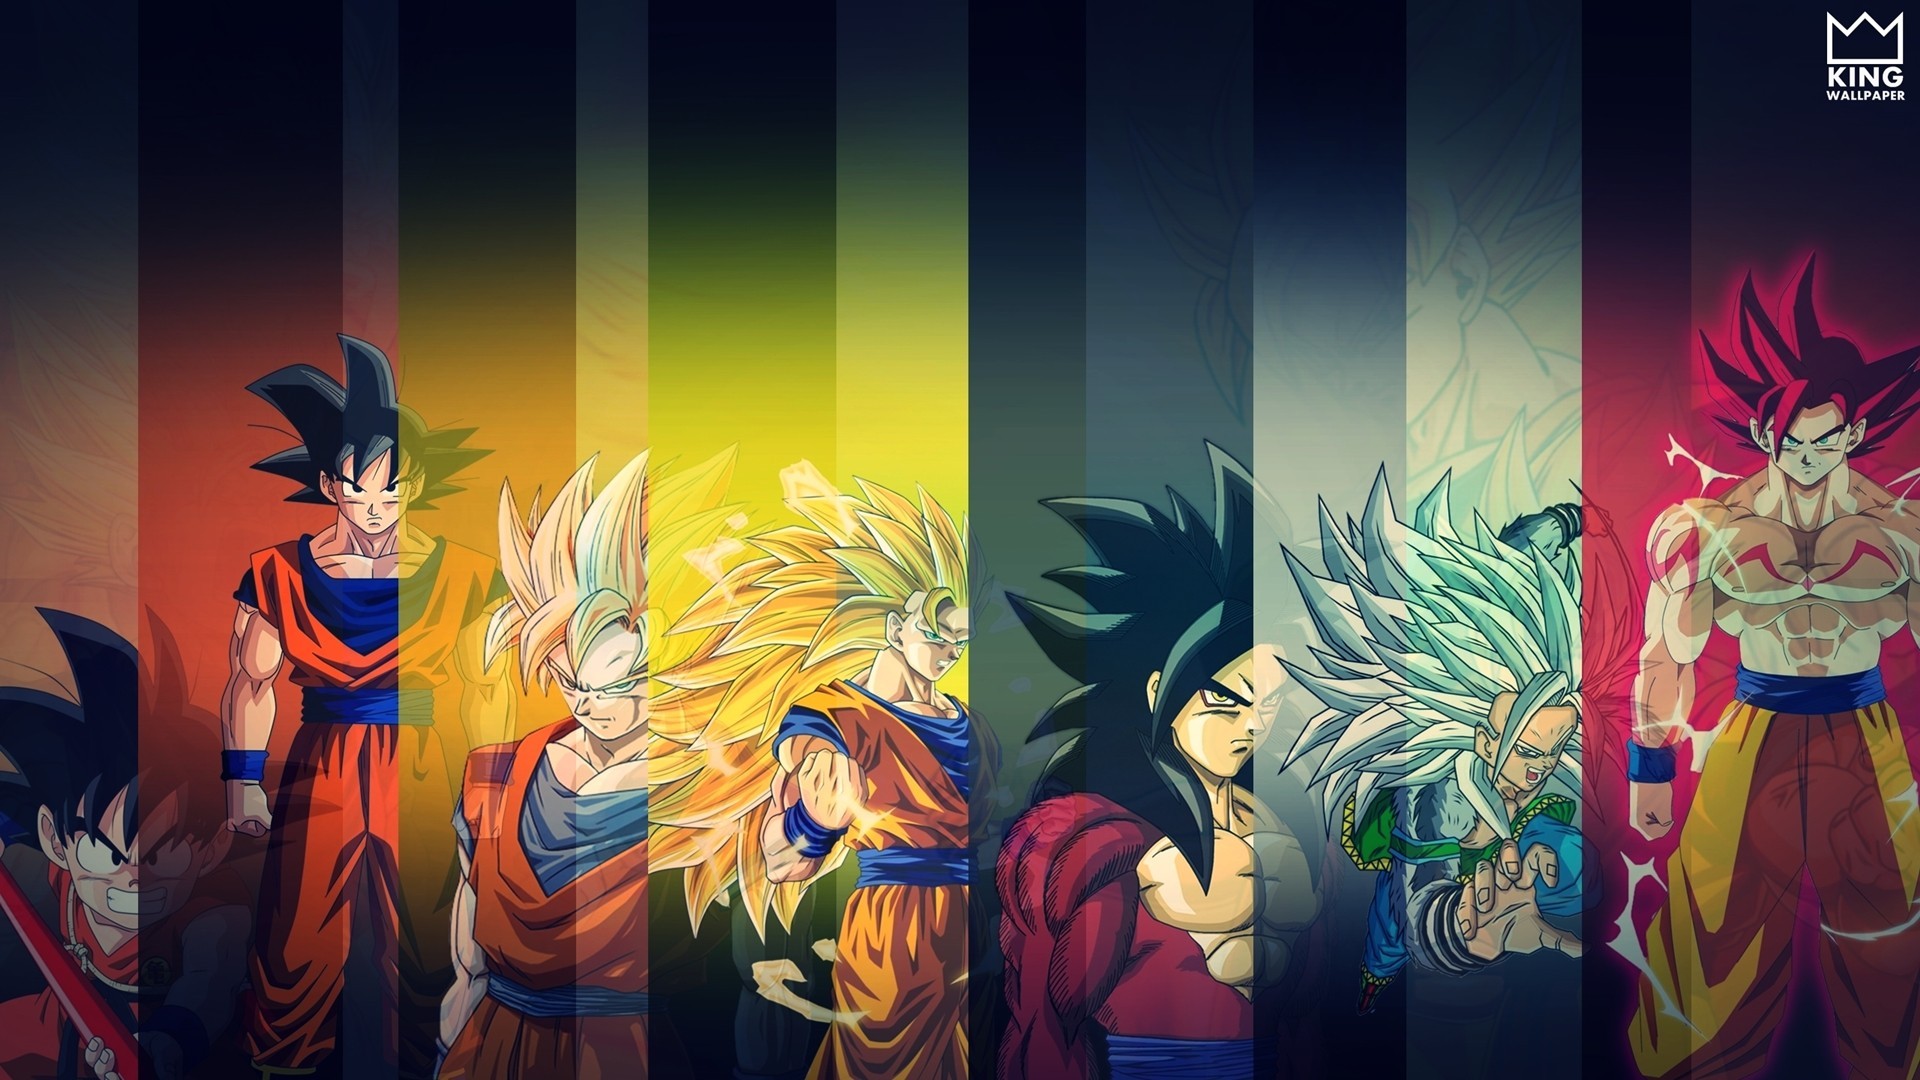 Goku Desktop Wallpaper with image resolution 1920x1080 pixel. You can use this wallpaper as background for your desktop Computer Screensavers, Android or iPhone smartphones